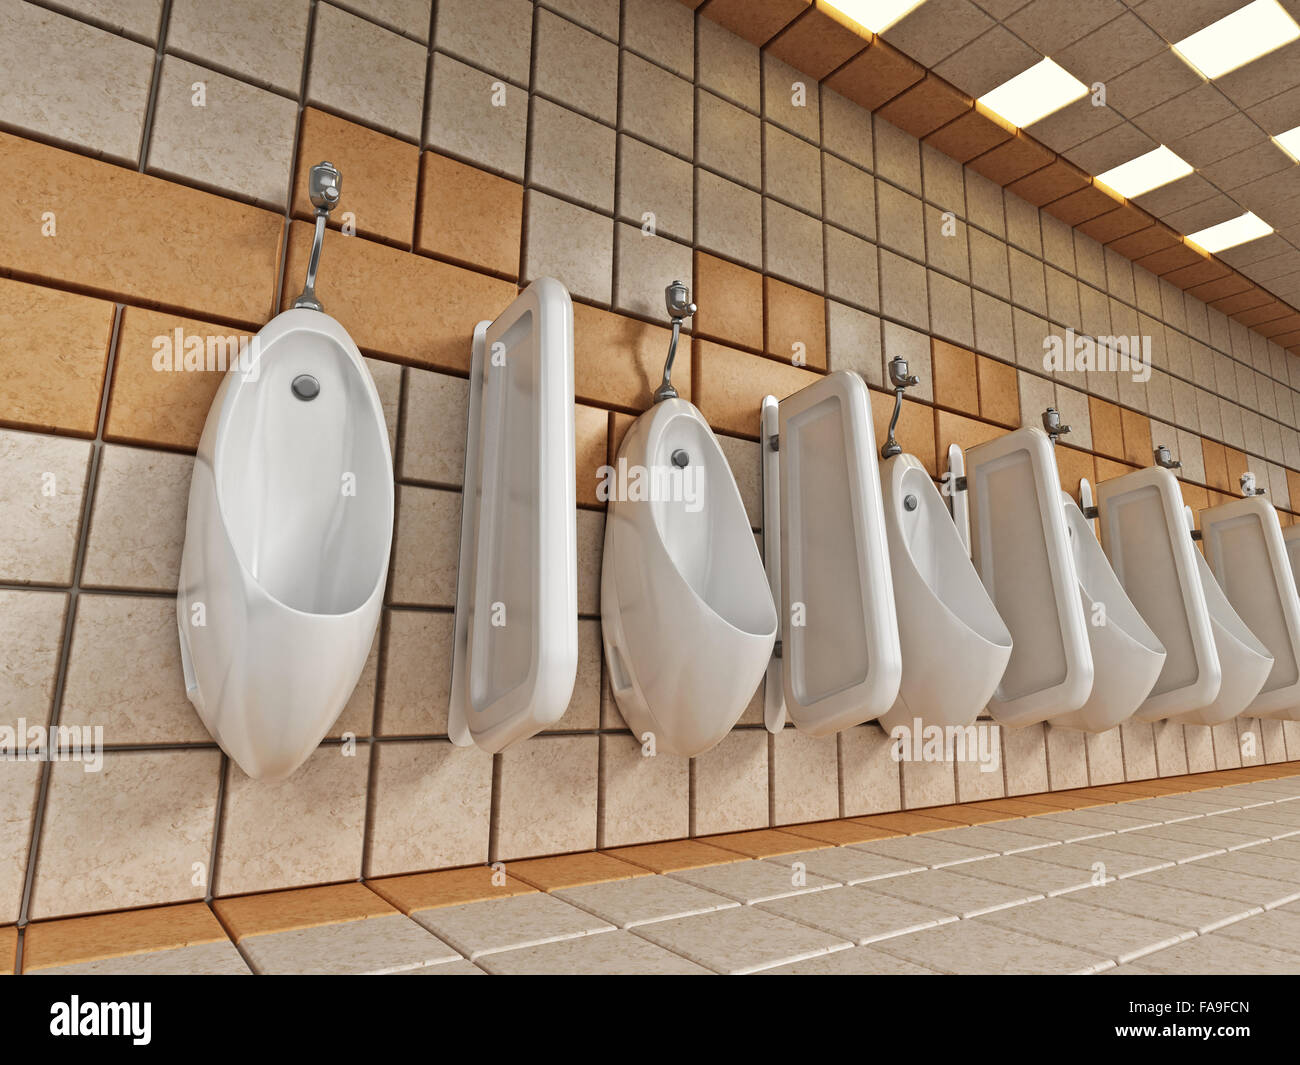 Public restroom with urinals hanging on the walls. Stock Photo